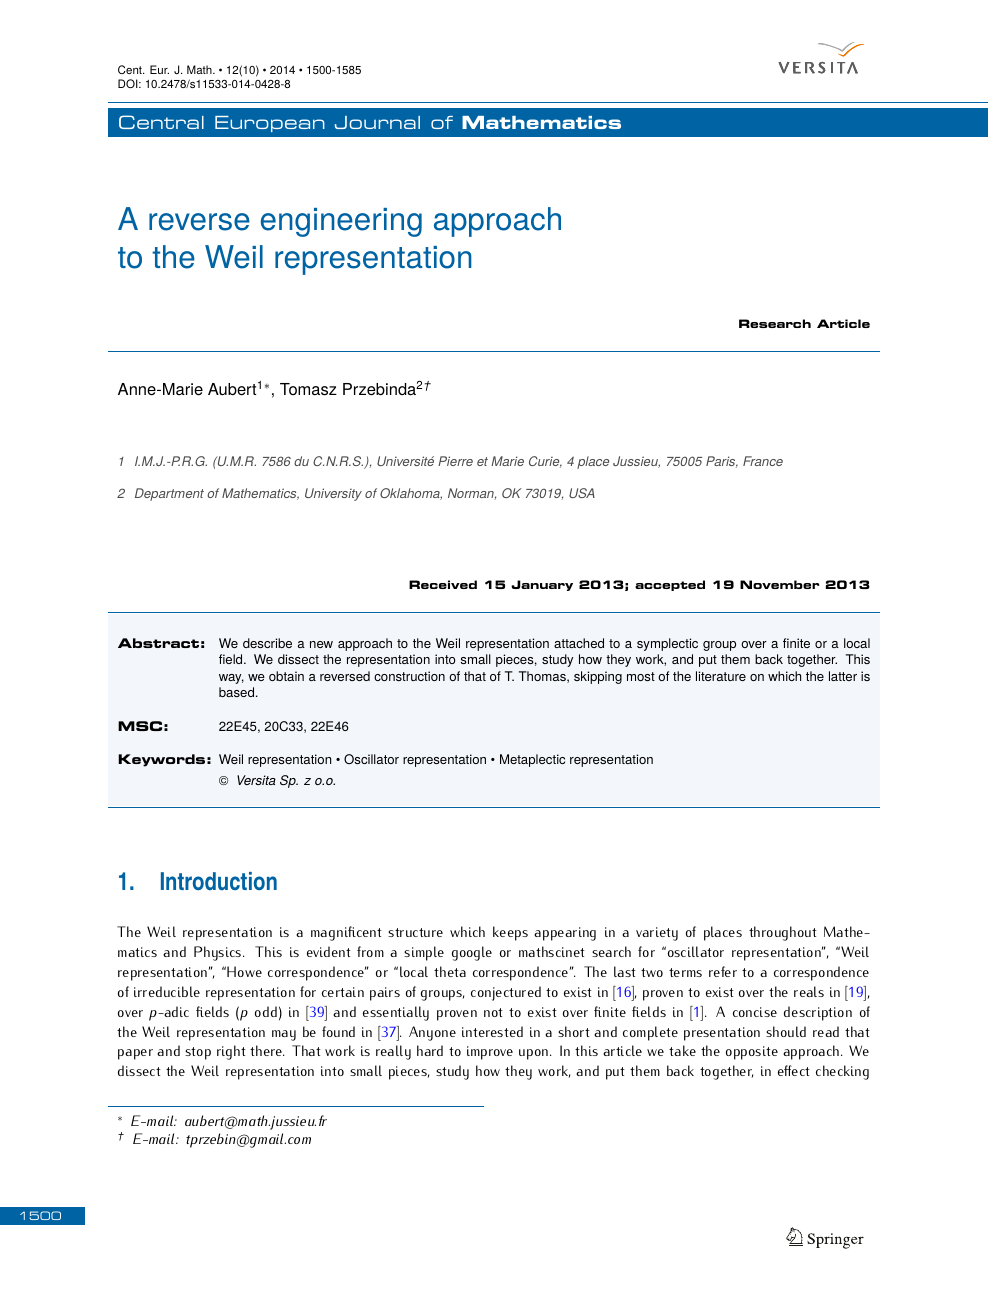 A Reverse Engineering Approach To The Weil Representation Topic Of Research Paper In Mathematics Download Scholarly Article Pdf And Read For Free On Cyberleninka Open Science Hub